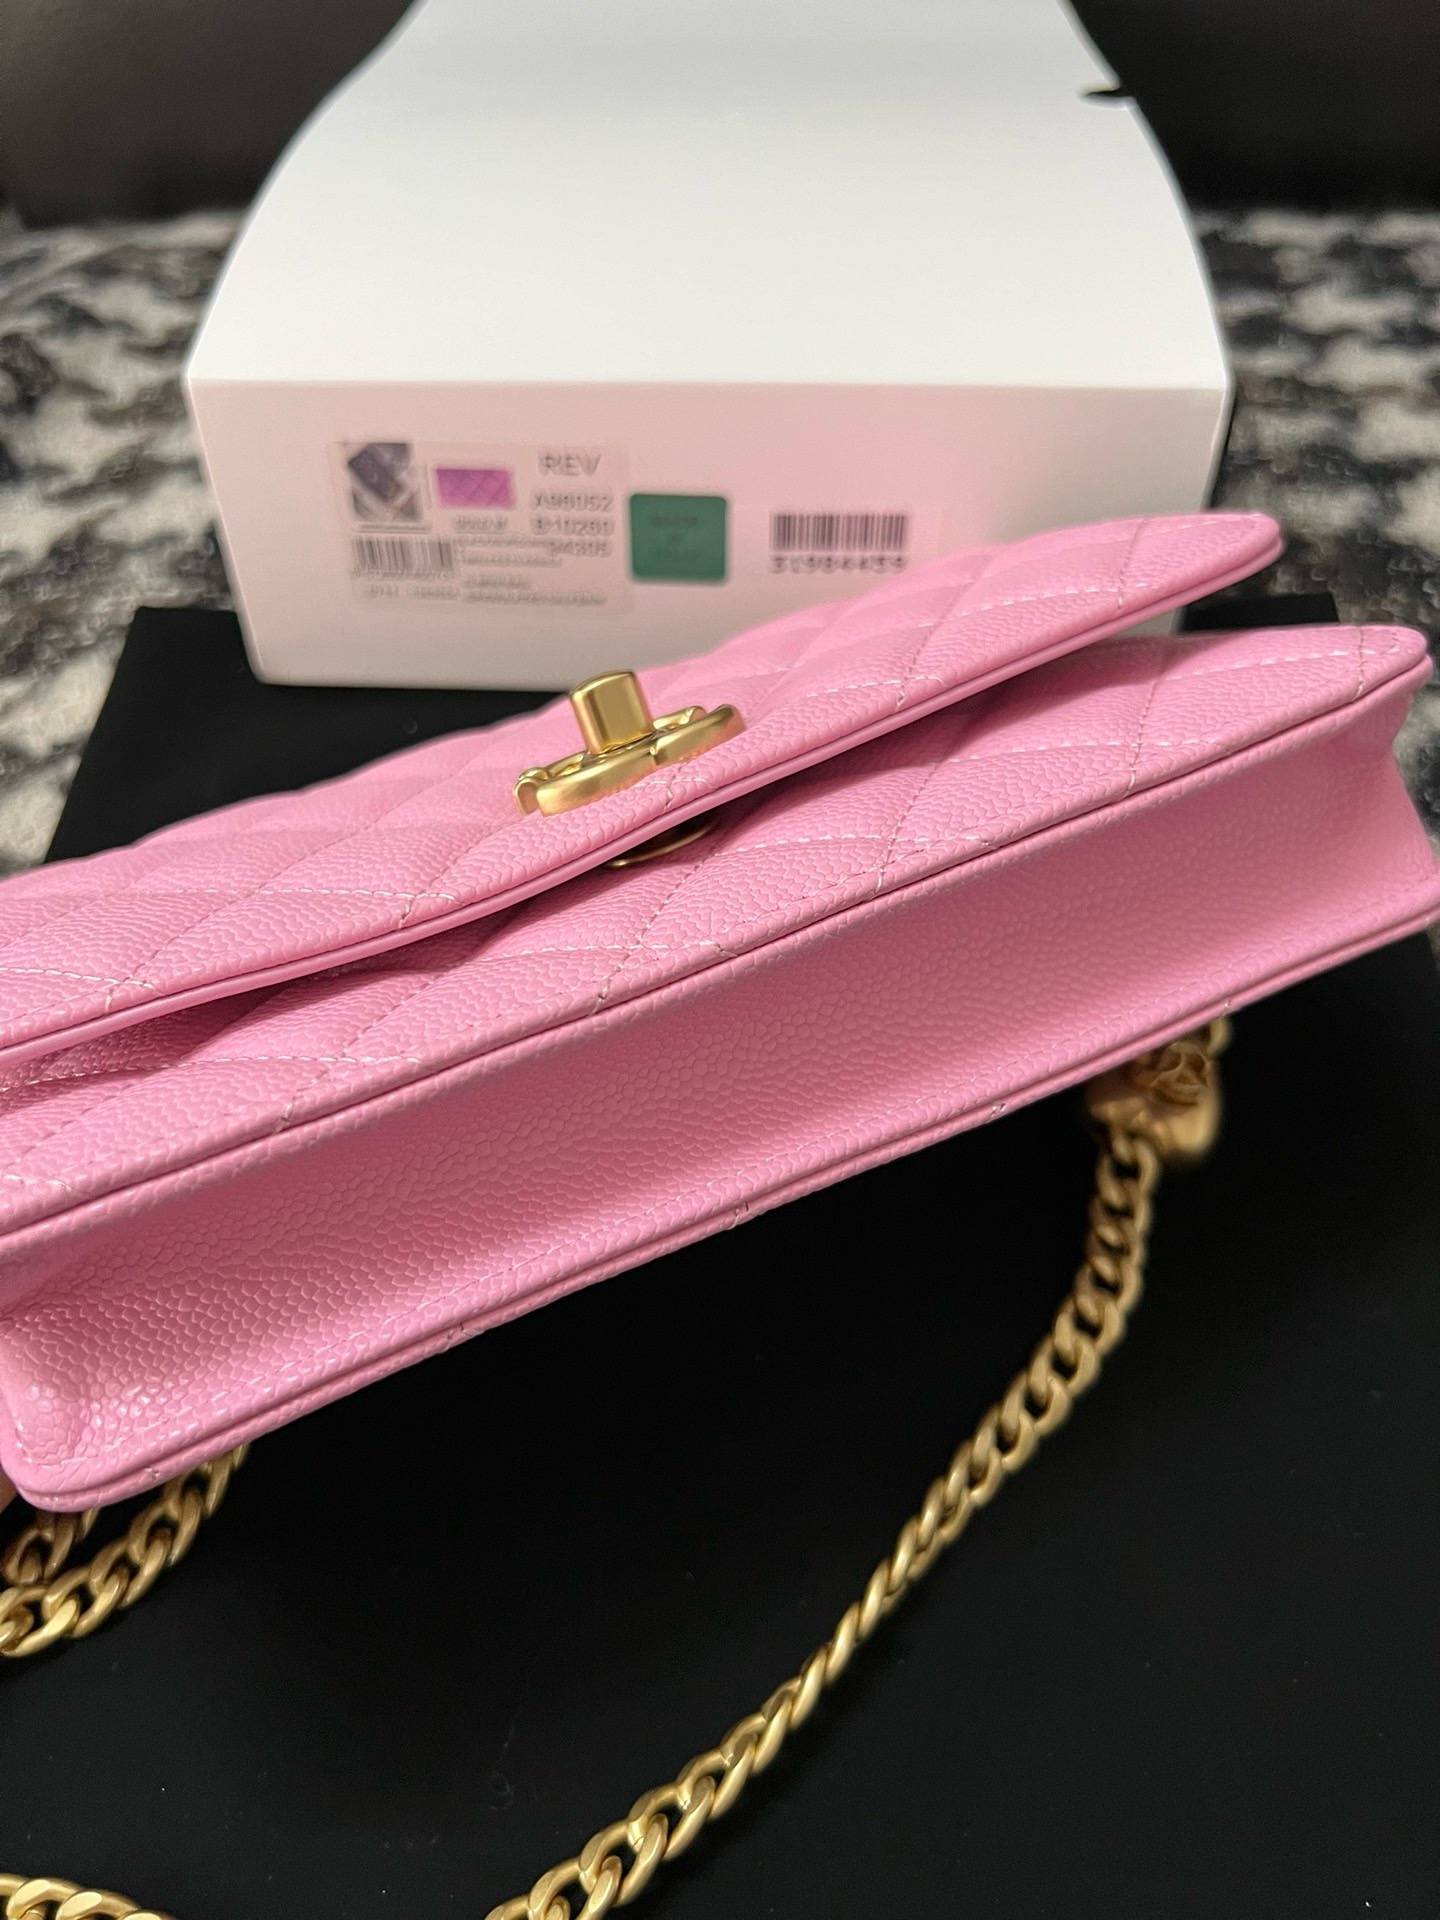 CHANEL WALLET ON CHAIN AP3971 pink